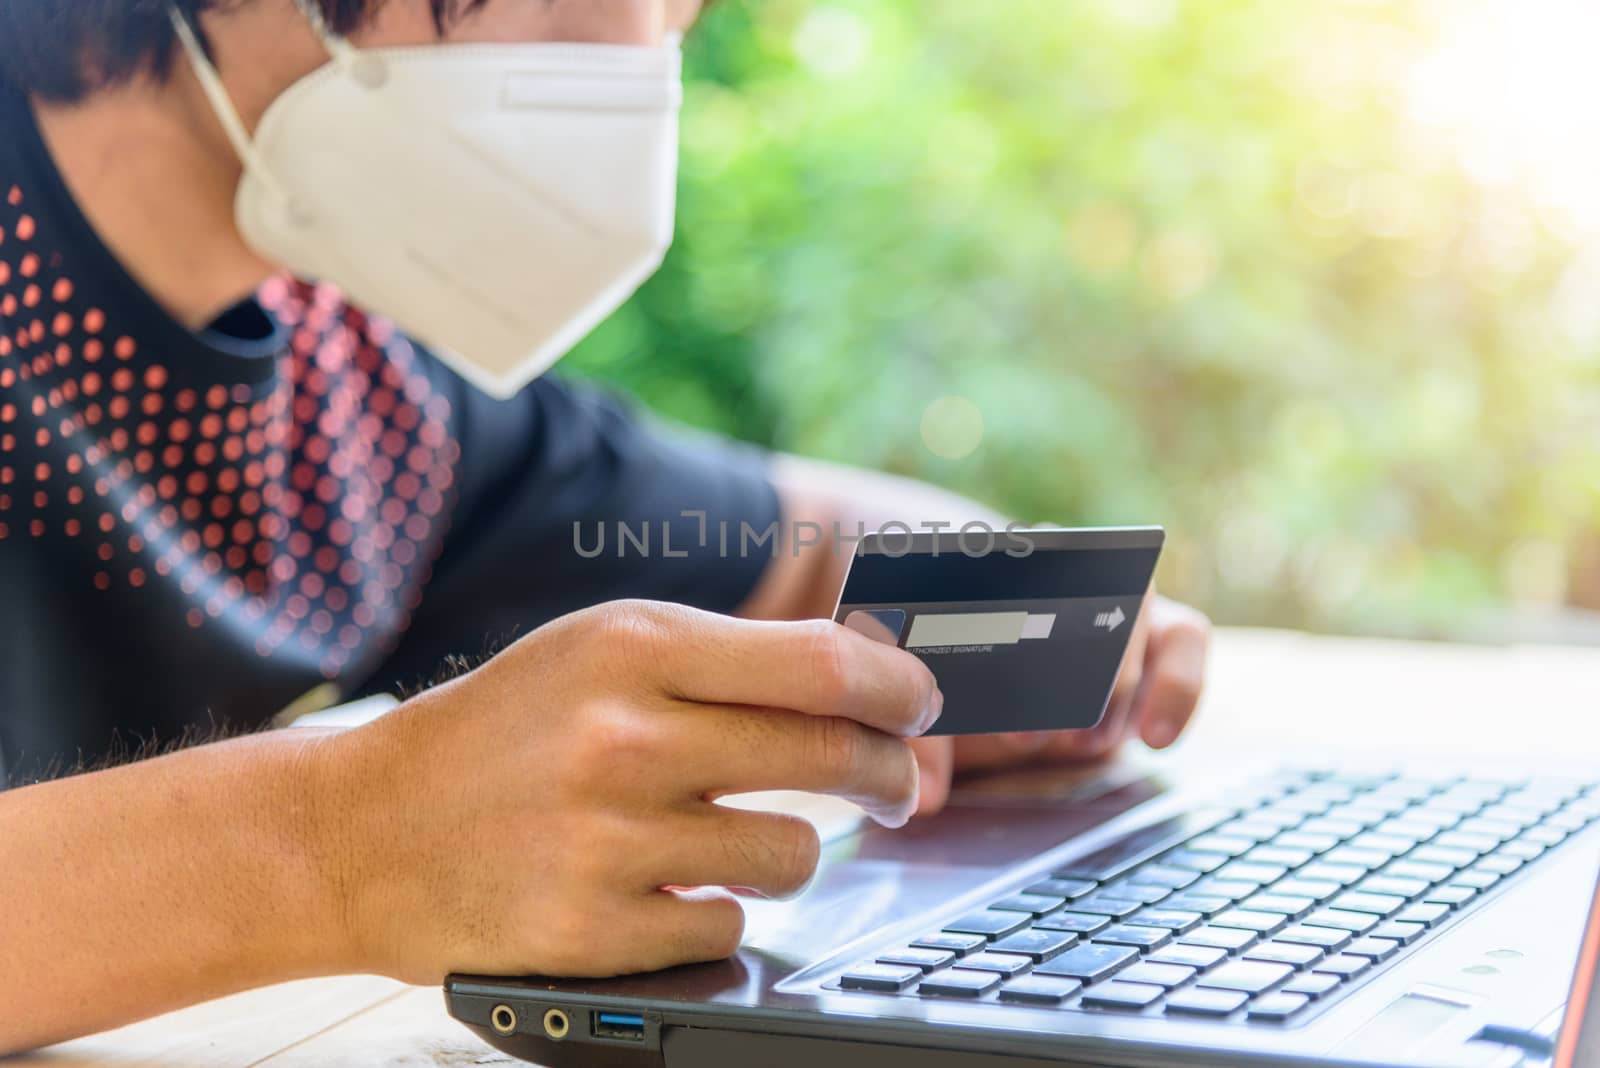 shoping from home in quarantine time/ the man wear mask and holding the credit card for shopping online in website by rukawajung